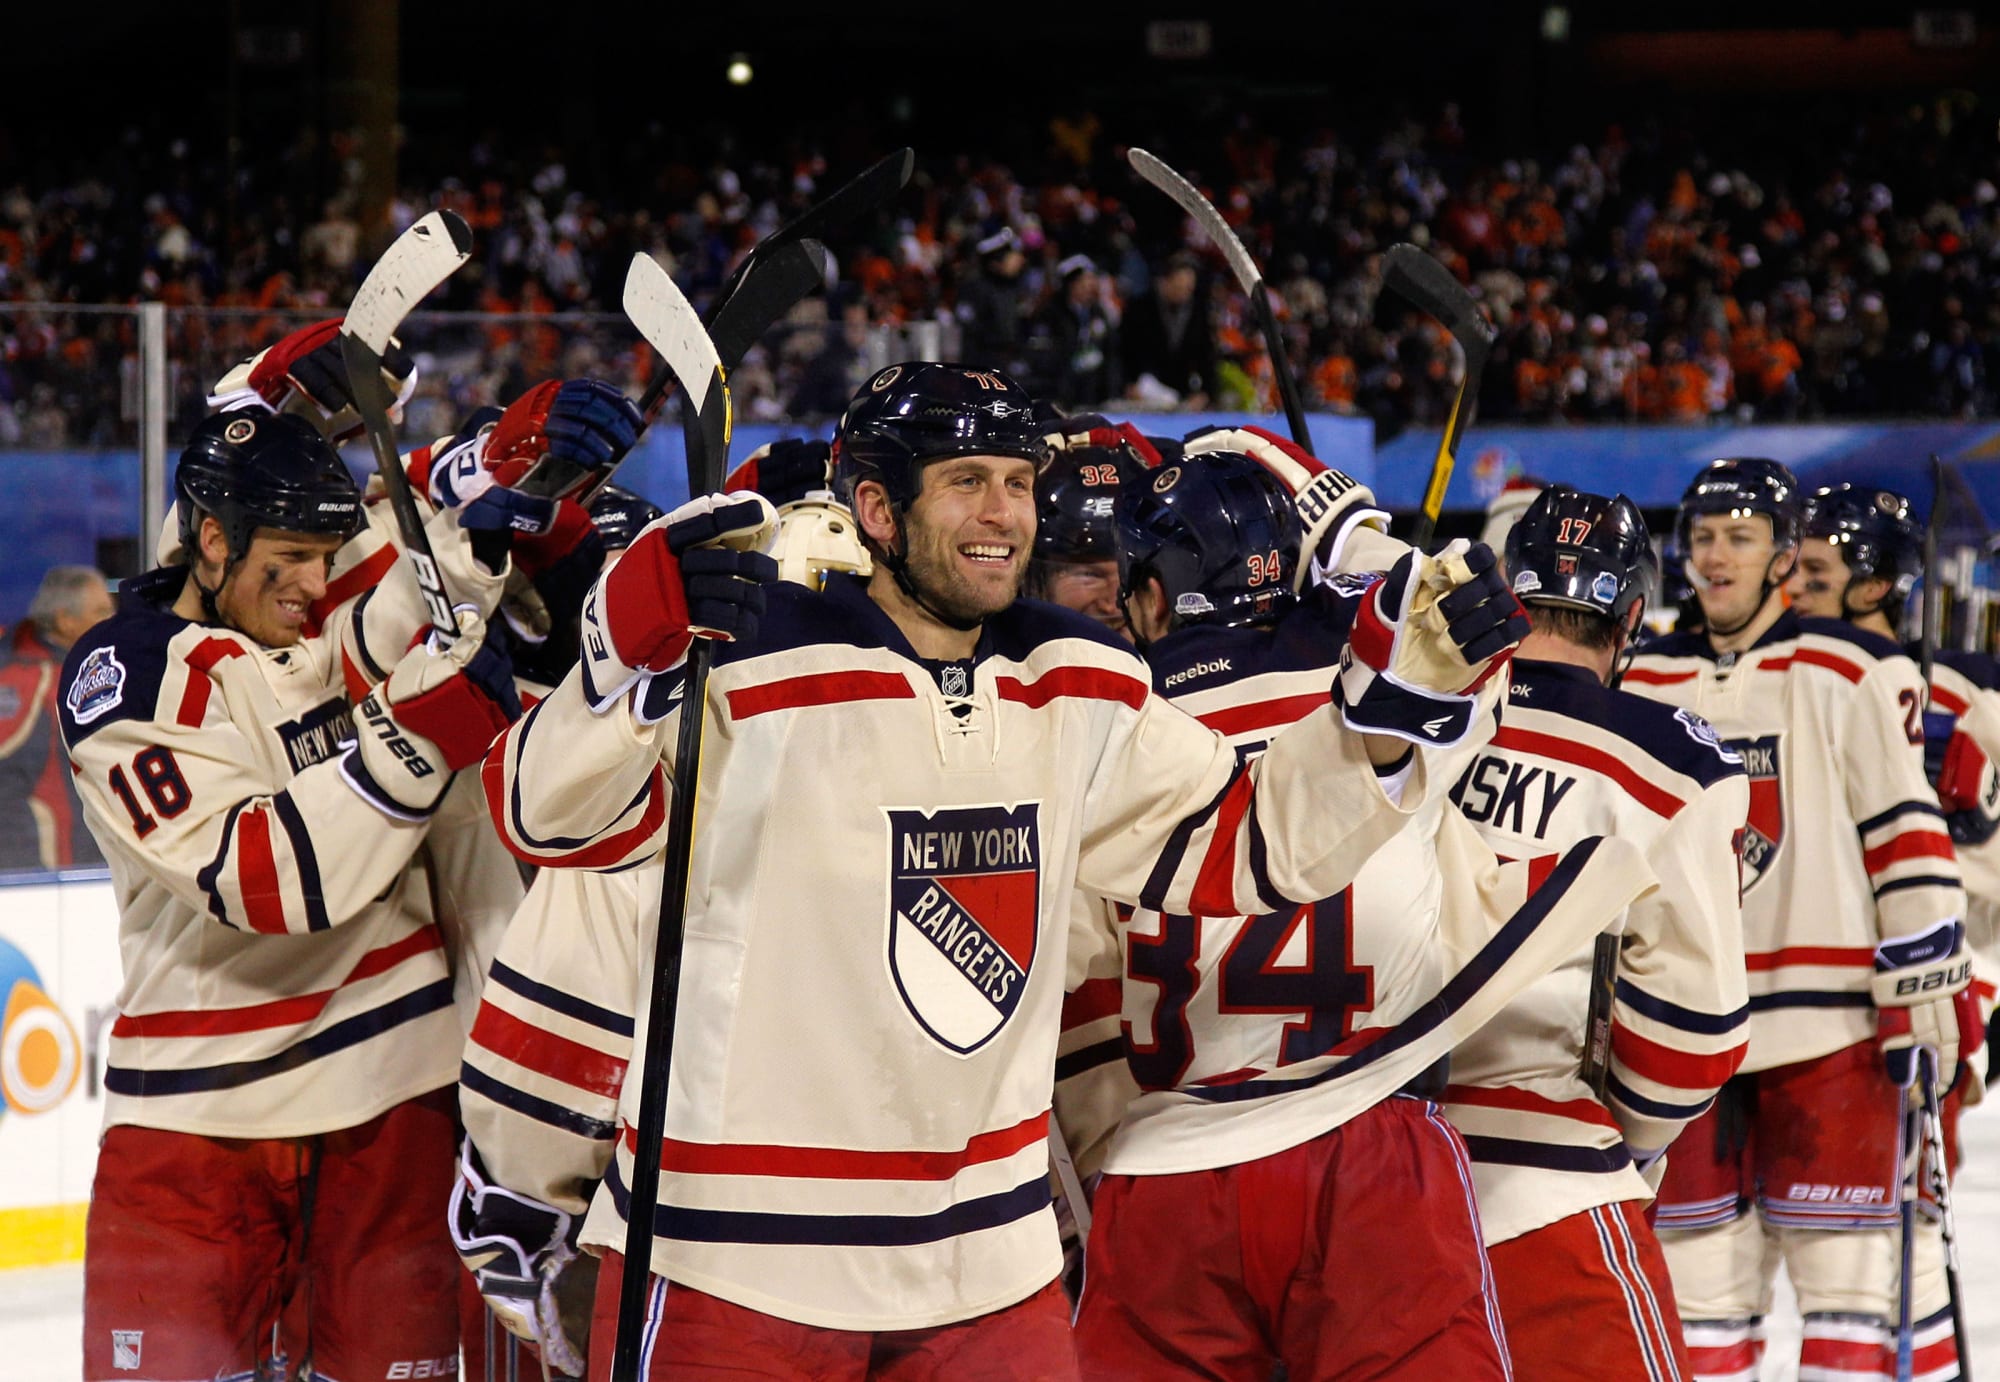 On January 2 in New York Rangers history: A Winter Classic for the